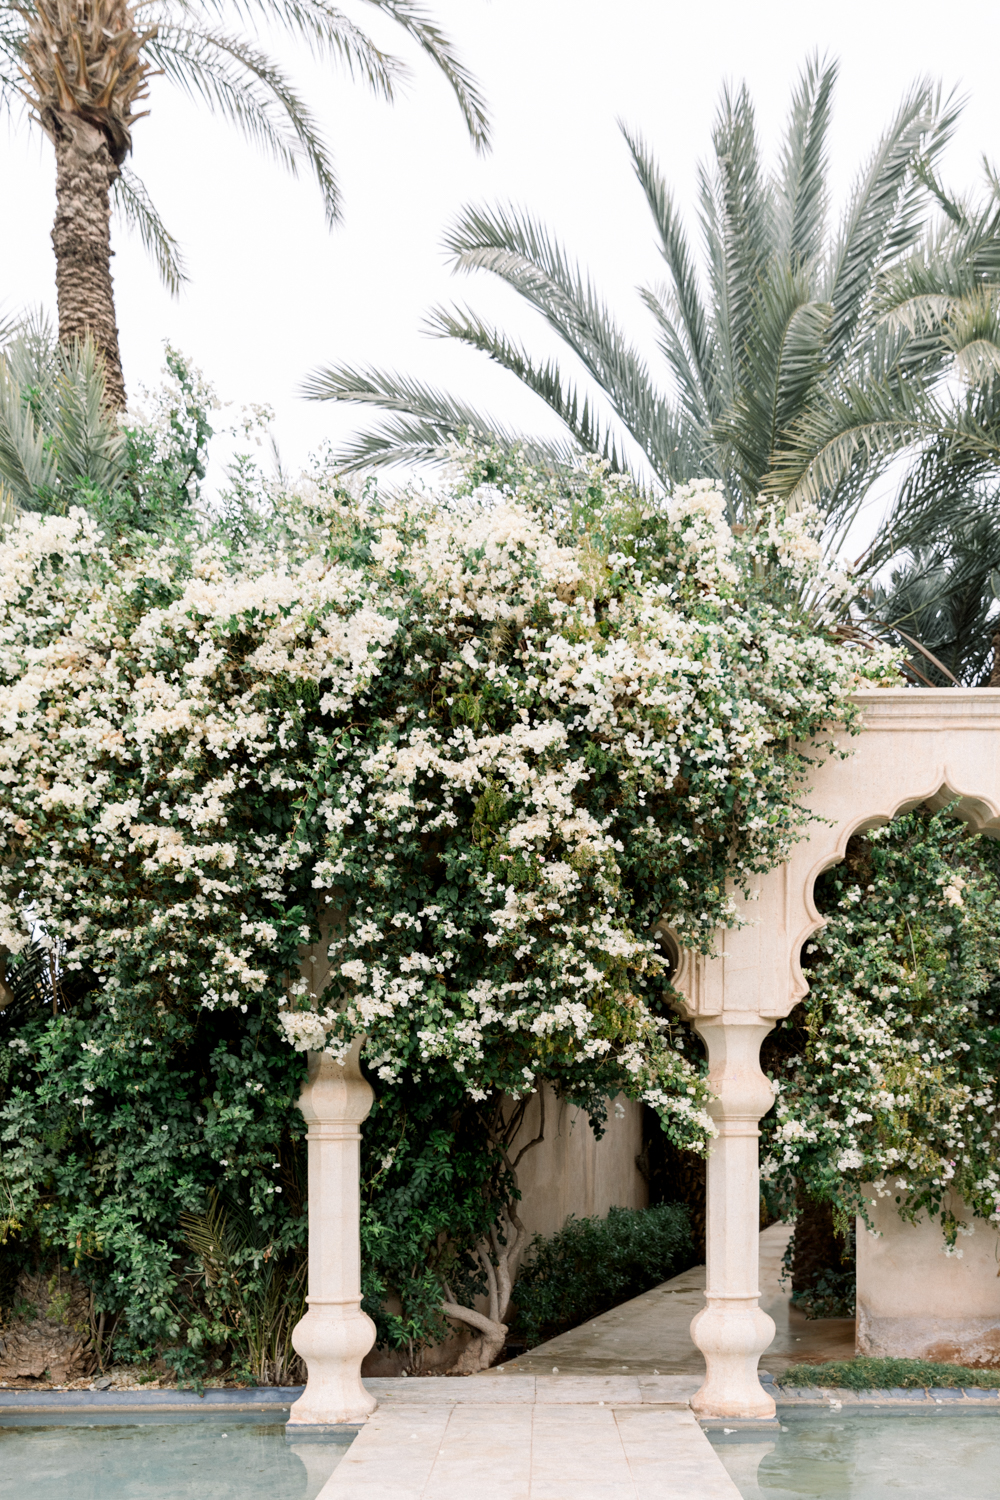 trailing white bougainvilleas cover the muted red Moroccan arches in the most luxurious way. Palm tress in the background.